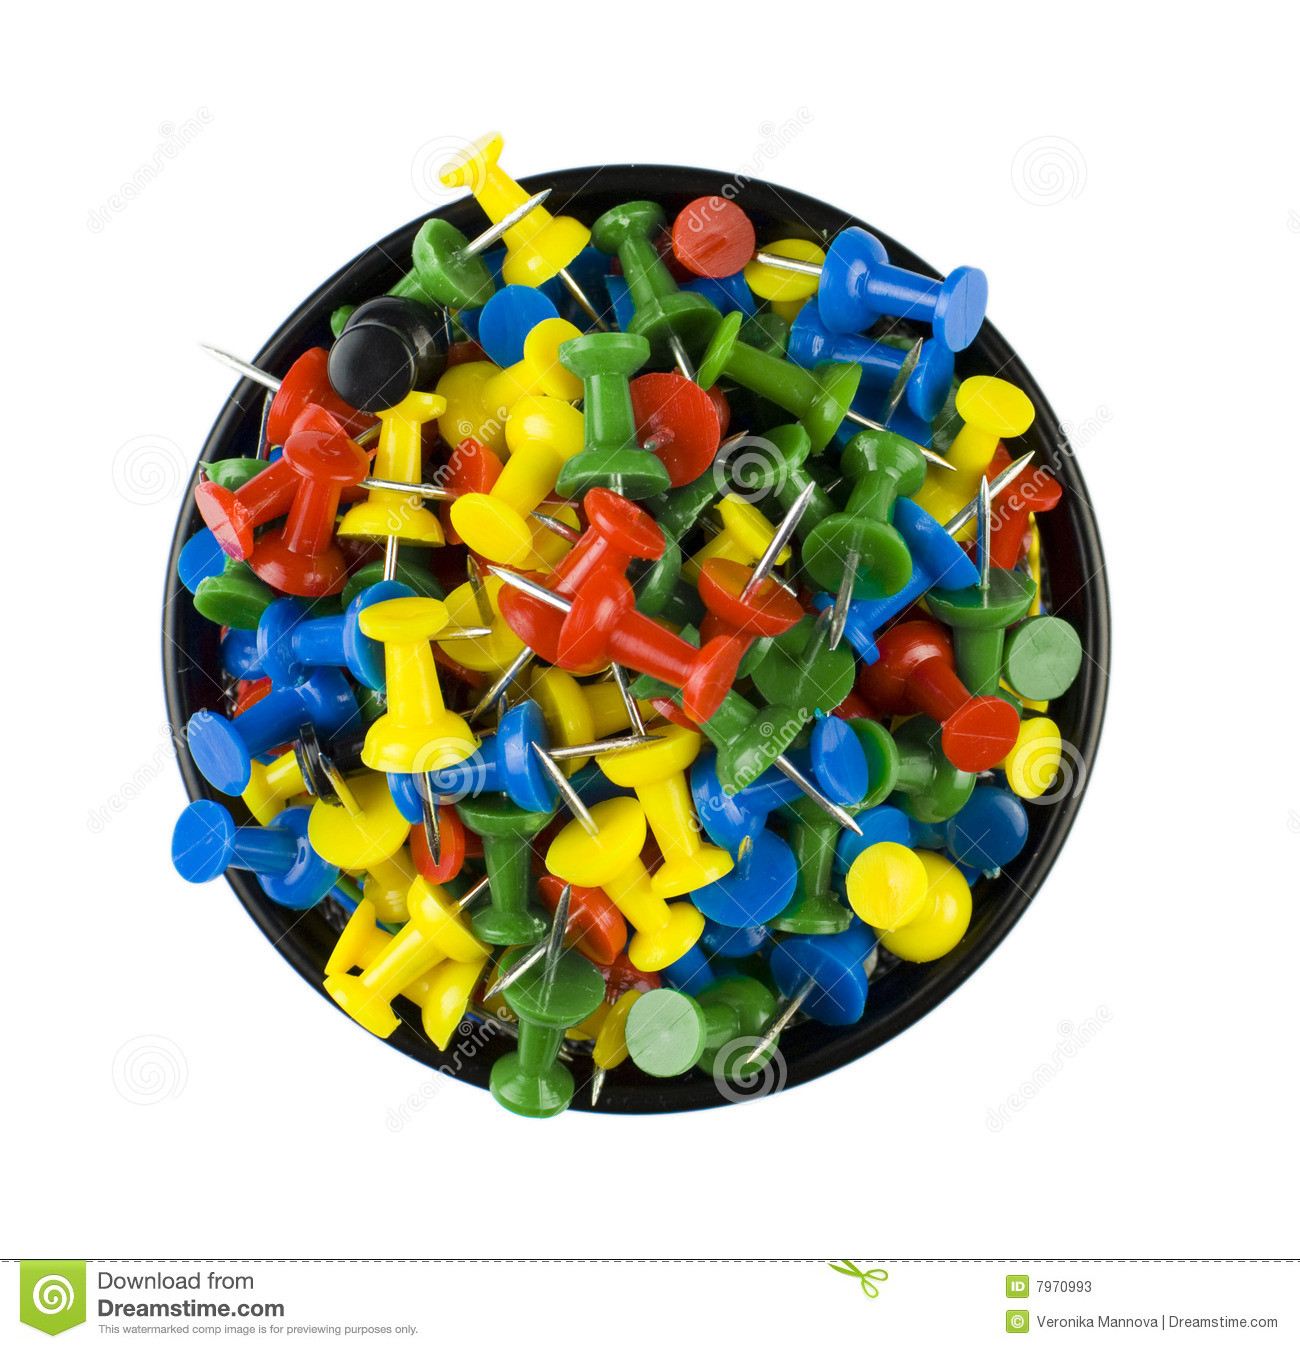 The Office Pins
 fice pins stock image Image of supplies colors items